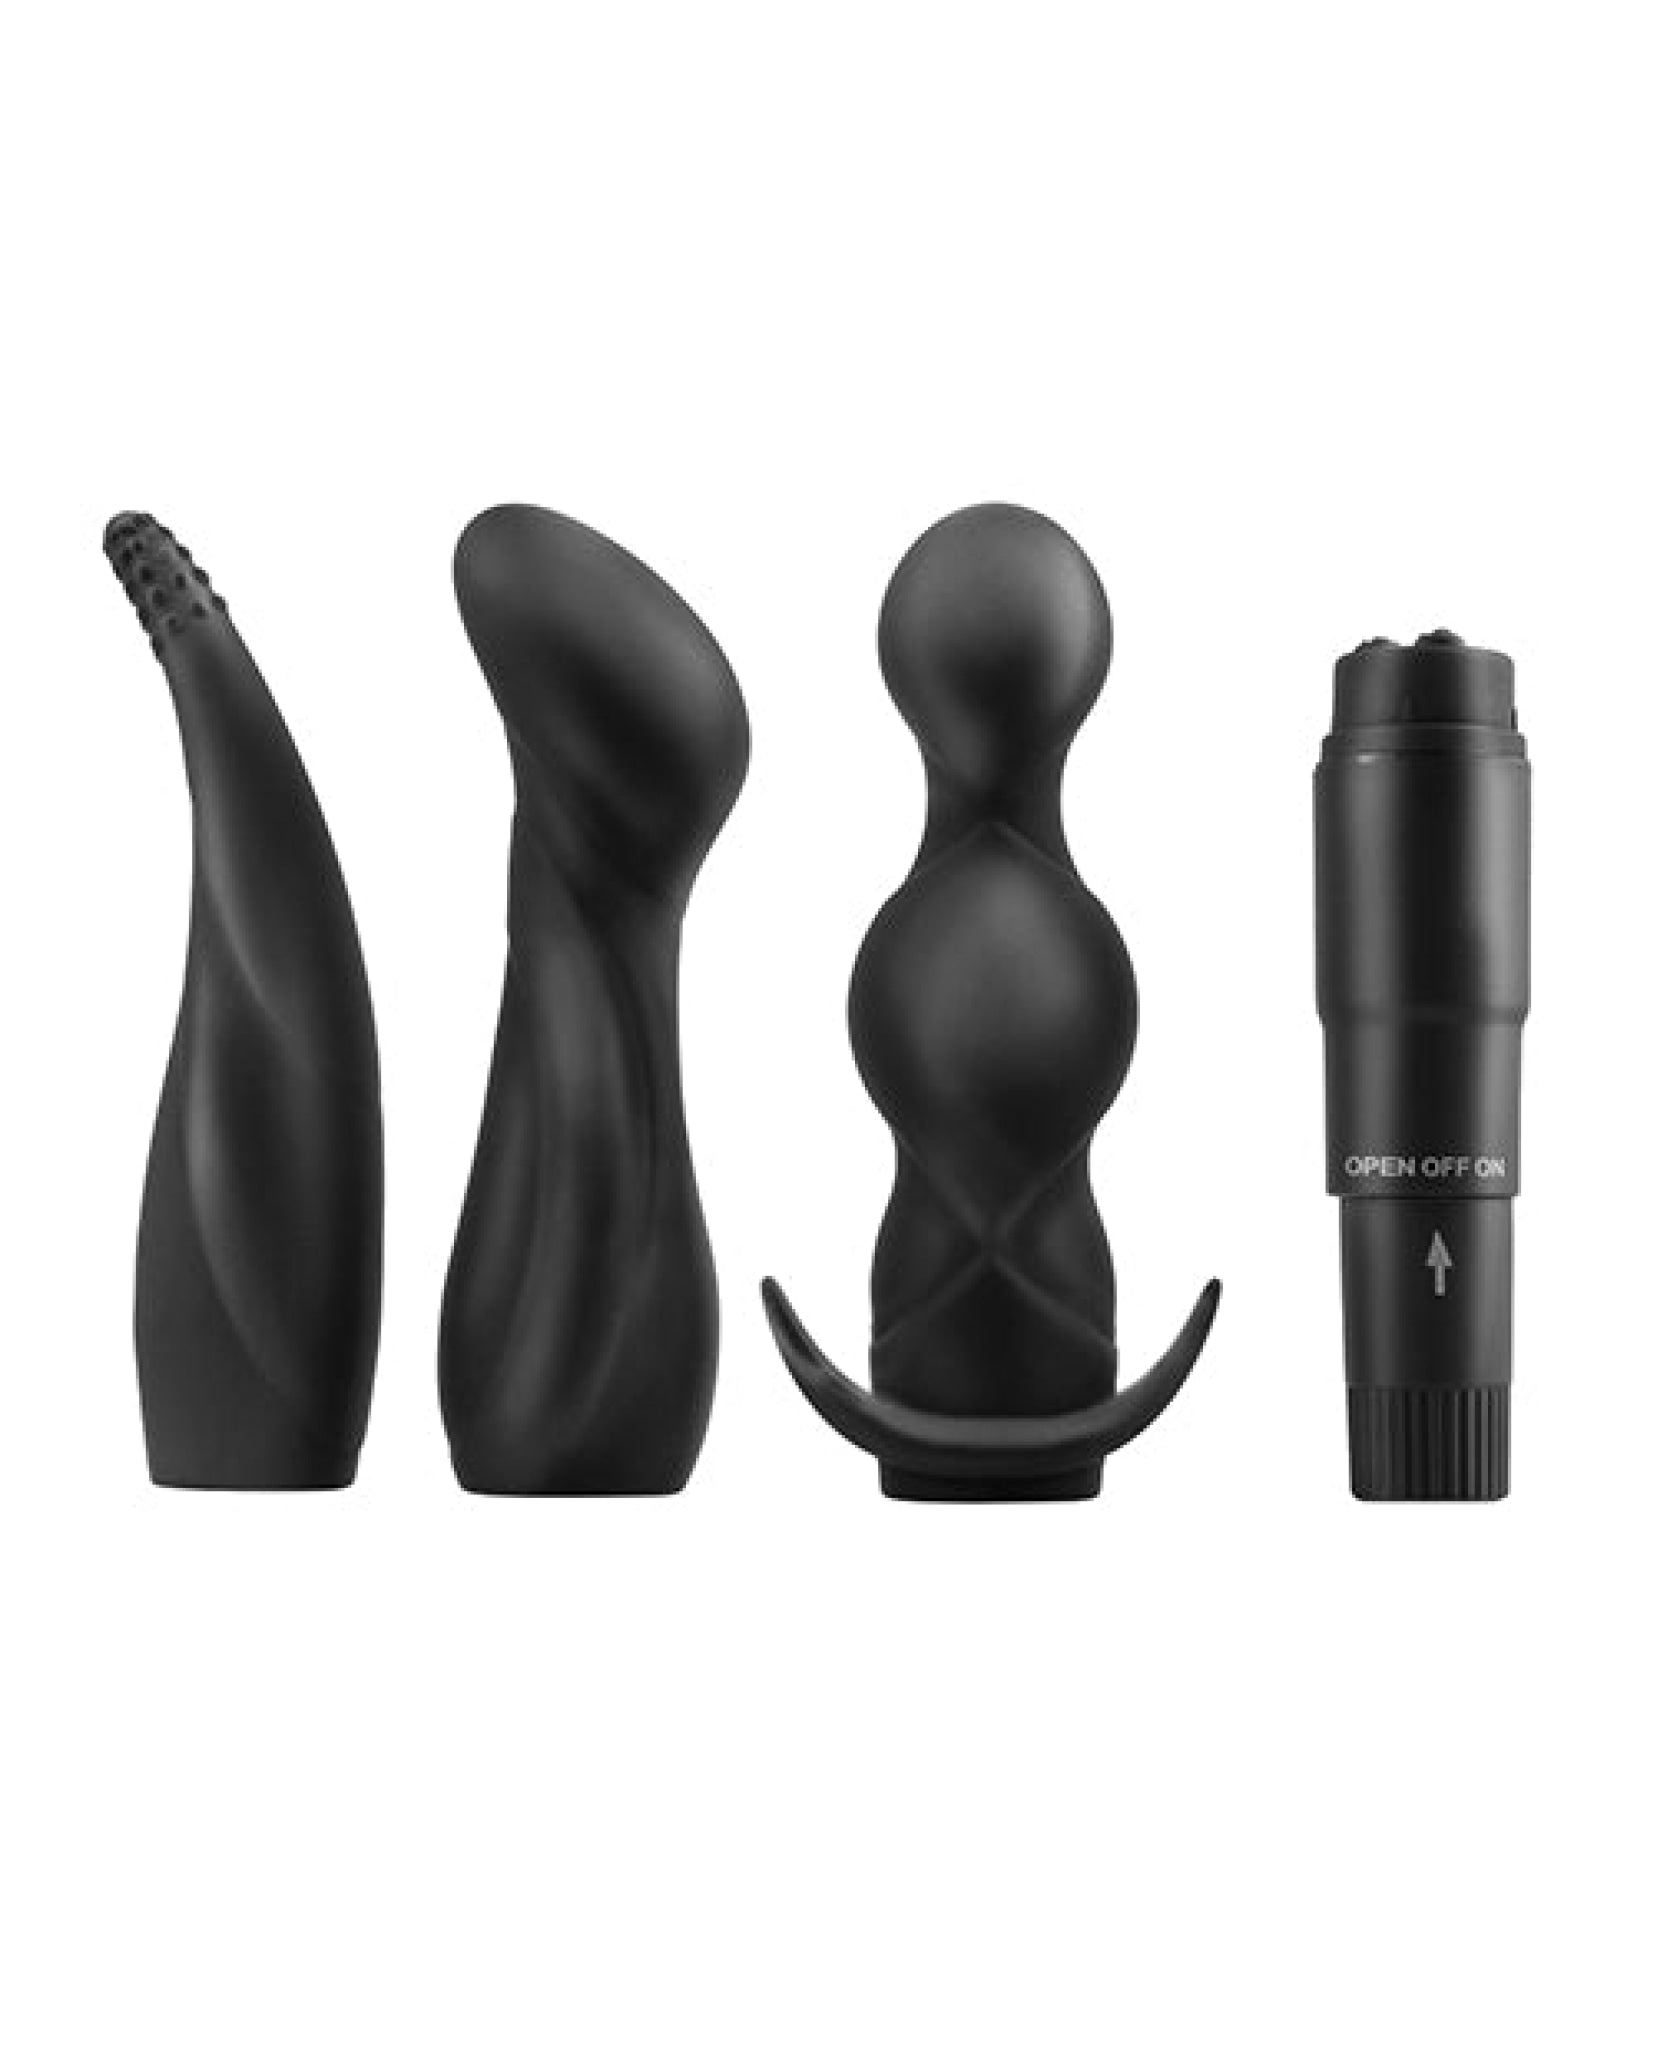 Anal Fantasy Collection Anal Adventure Kit - Black Pipedream®